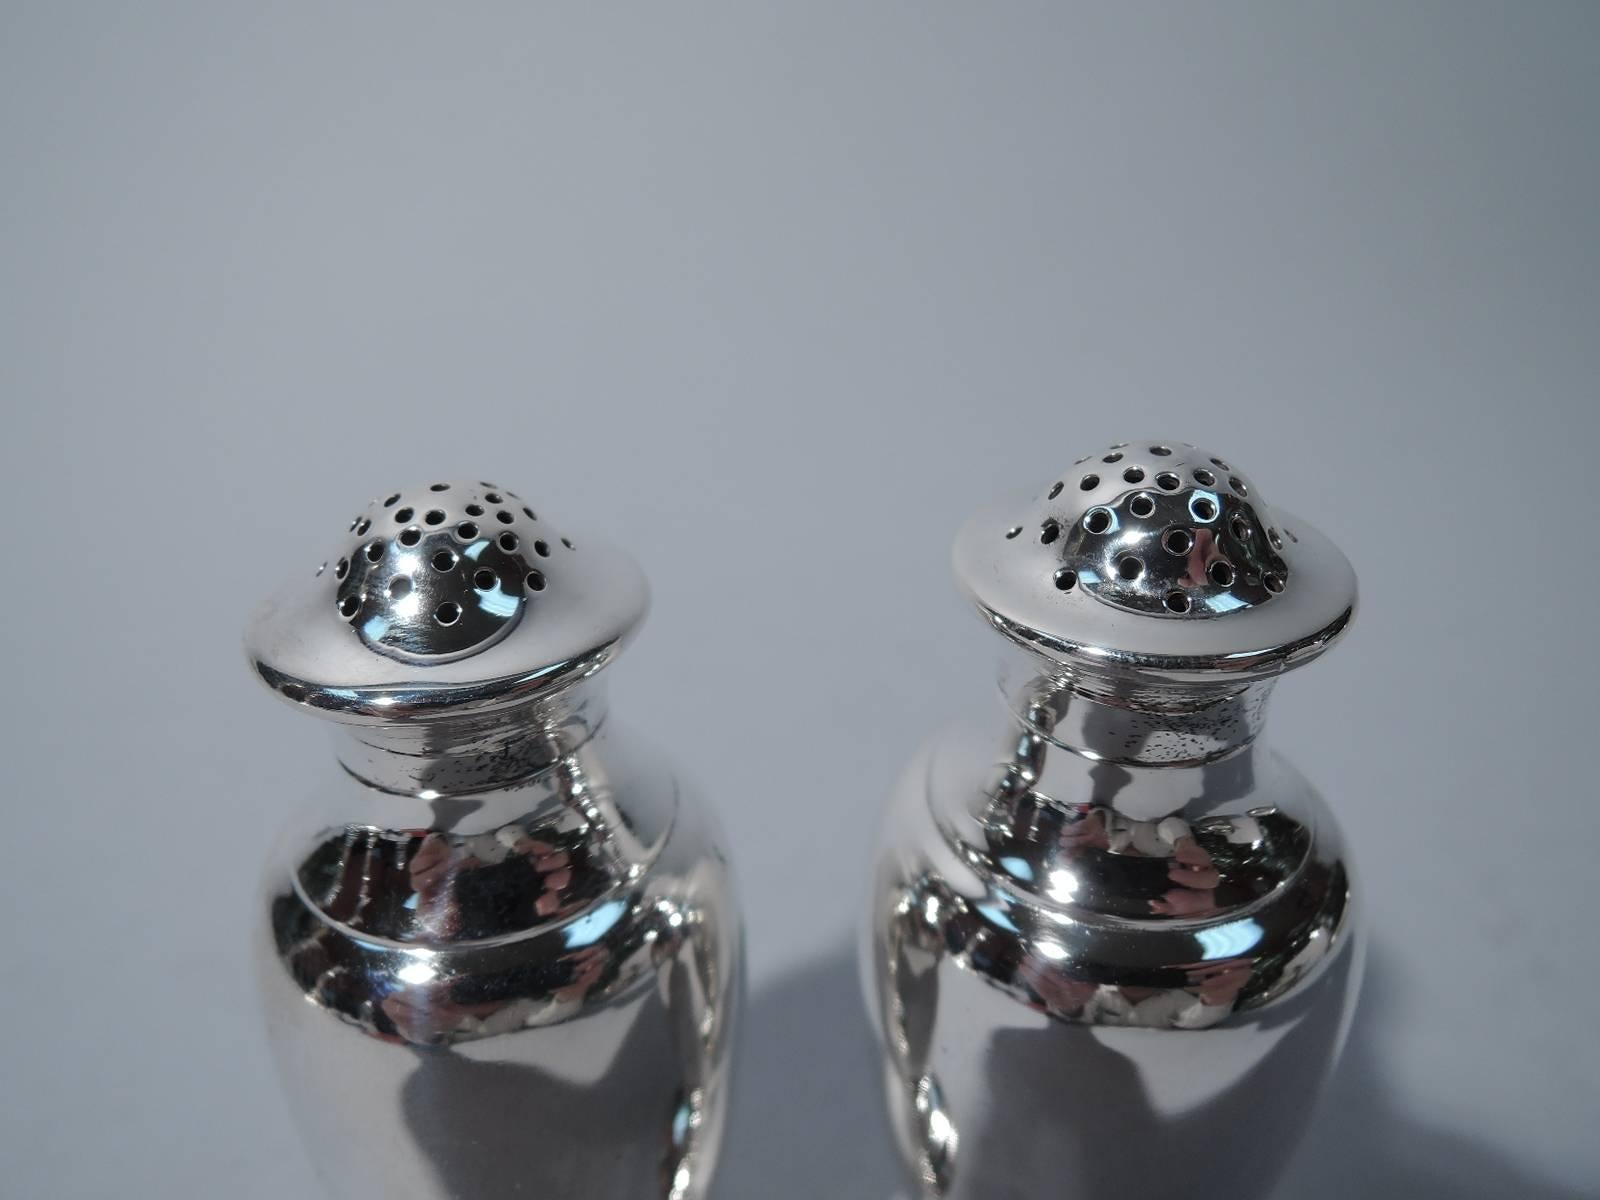 Pair of sterling silver salt and pepper shakers. Made by Tiffany & Co. in New York. Each: baluster on stepped foot. Pierced, domed, and detachable cover. Hallmark includes pattern no. 9122B and director's letter m (1907-47). Excellent